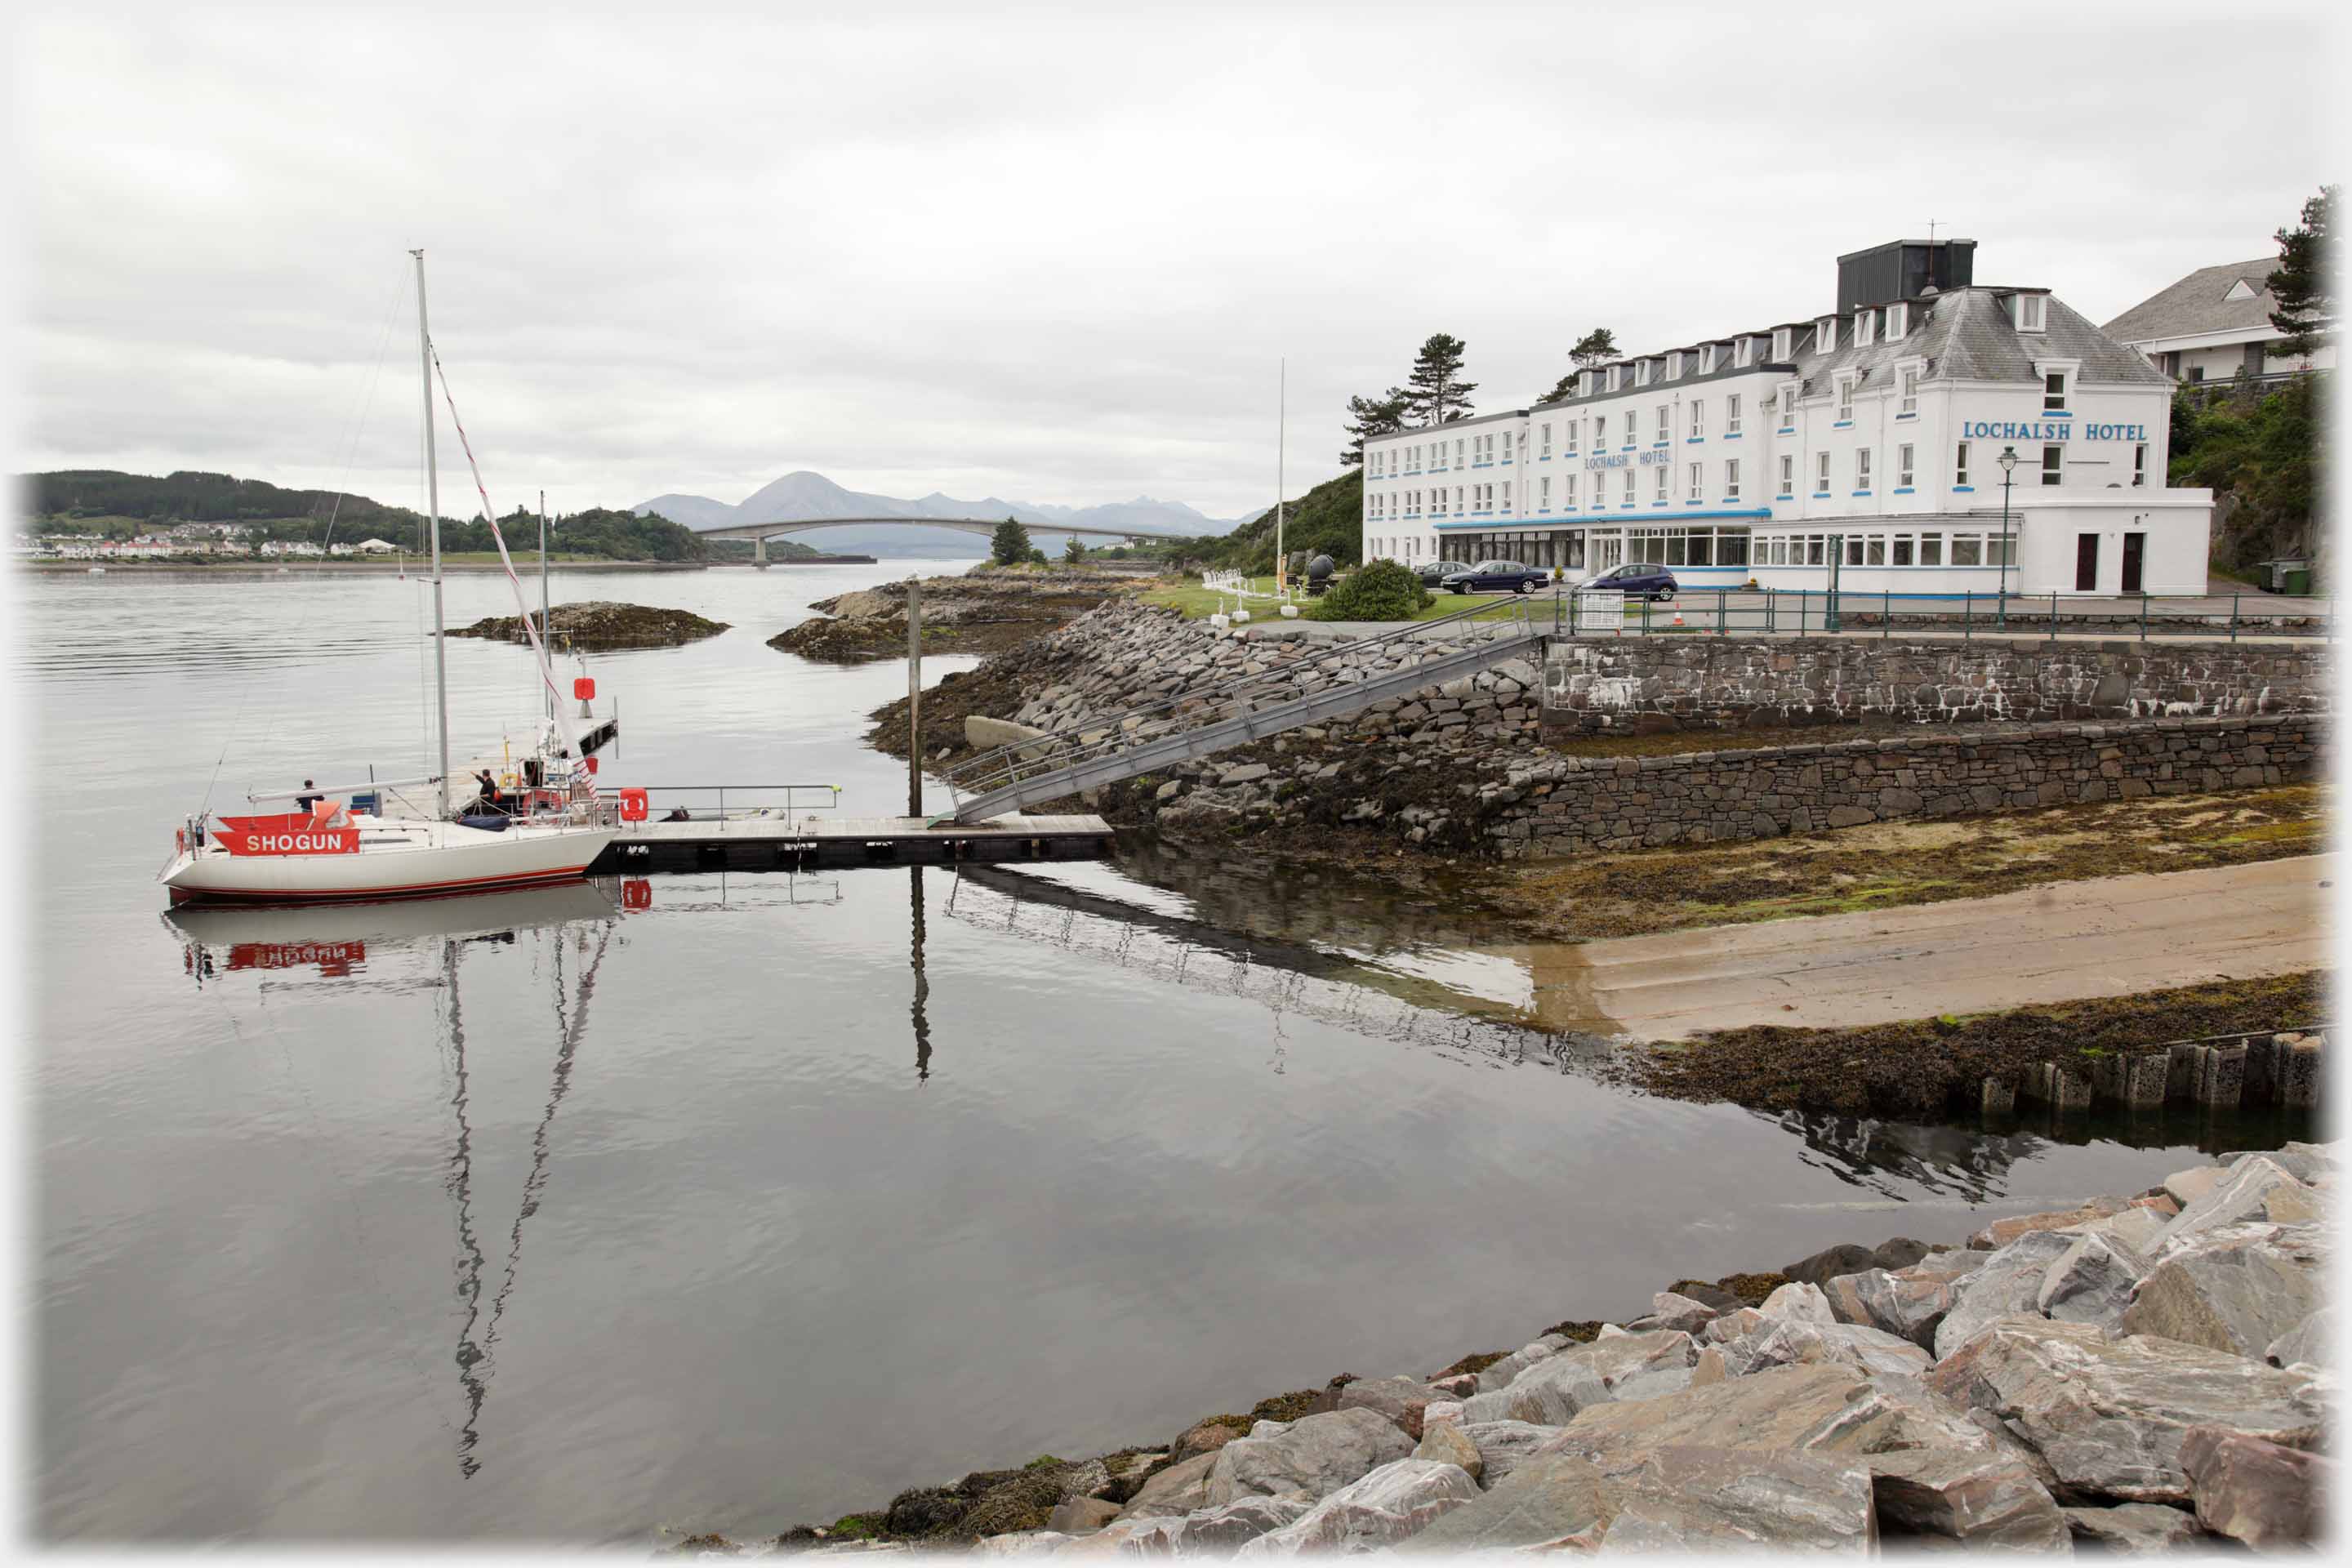 The Lochalsh Hotel, landing stage and bridge in the distance.